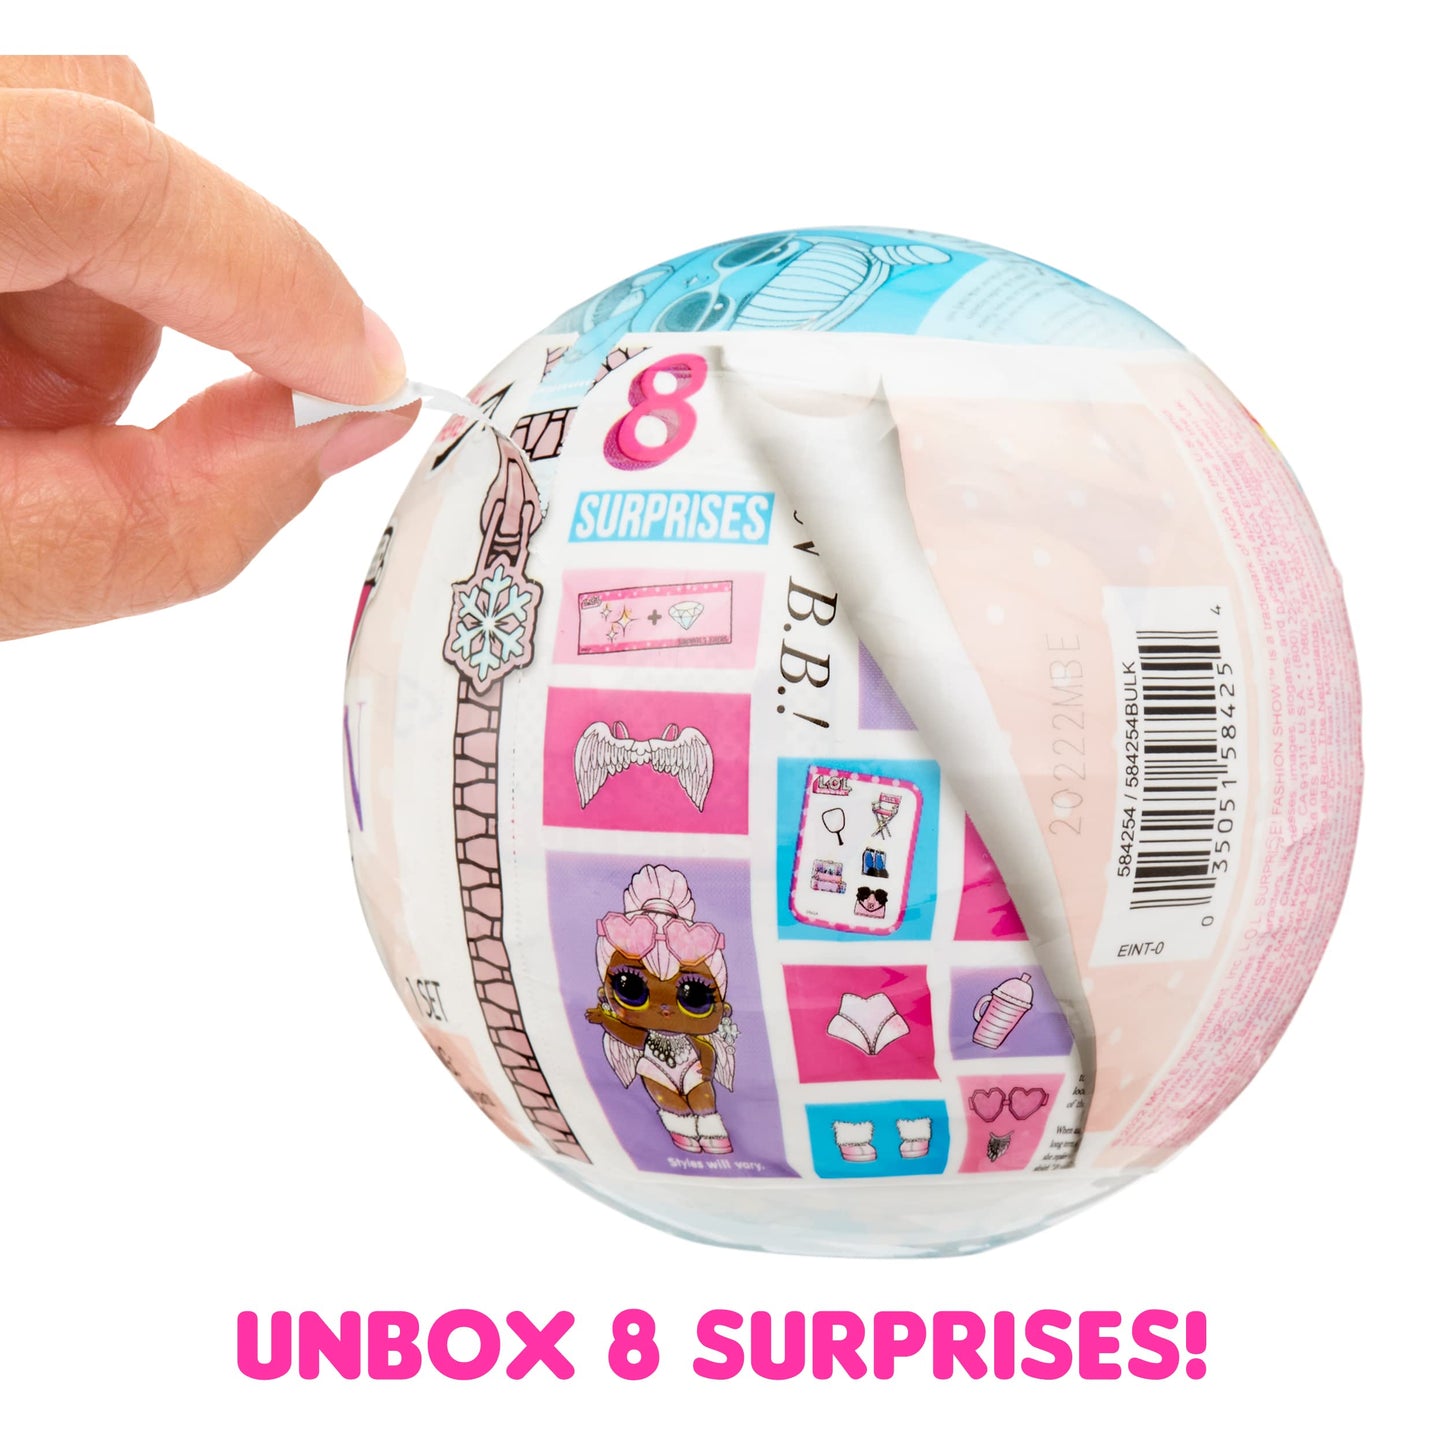 L.O.L. Surprise! Fashion Show Dolls in Paper Ball with 8 Surprises